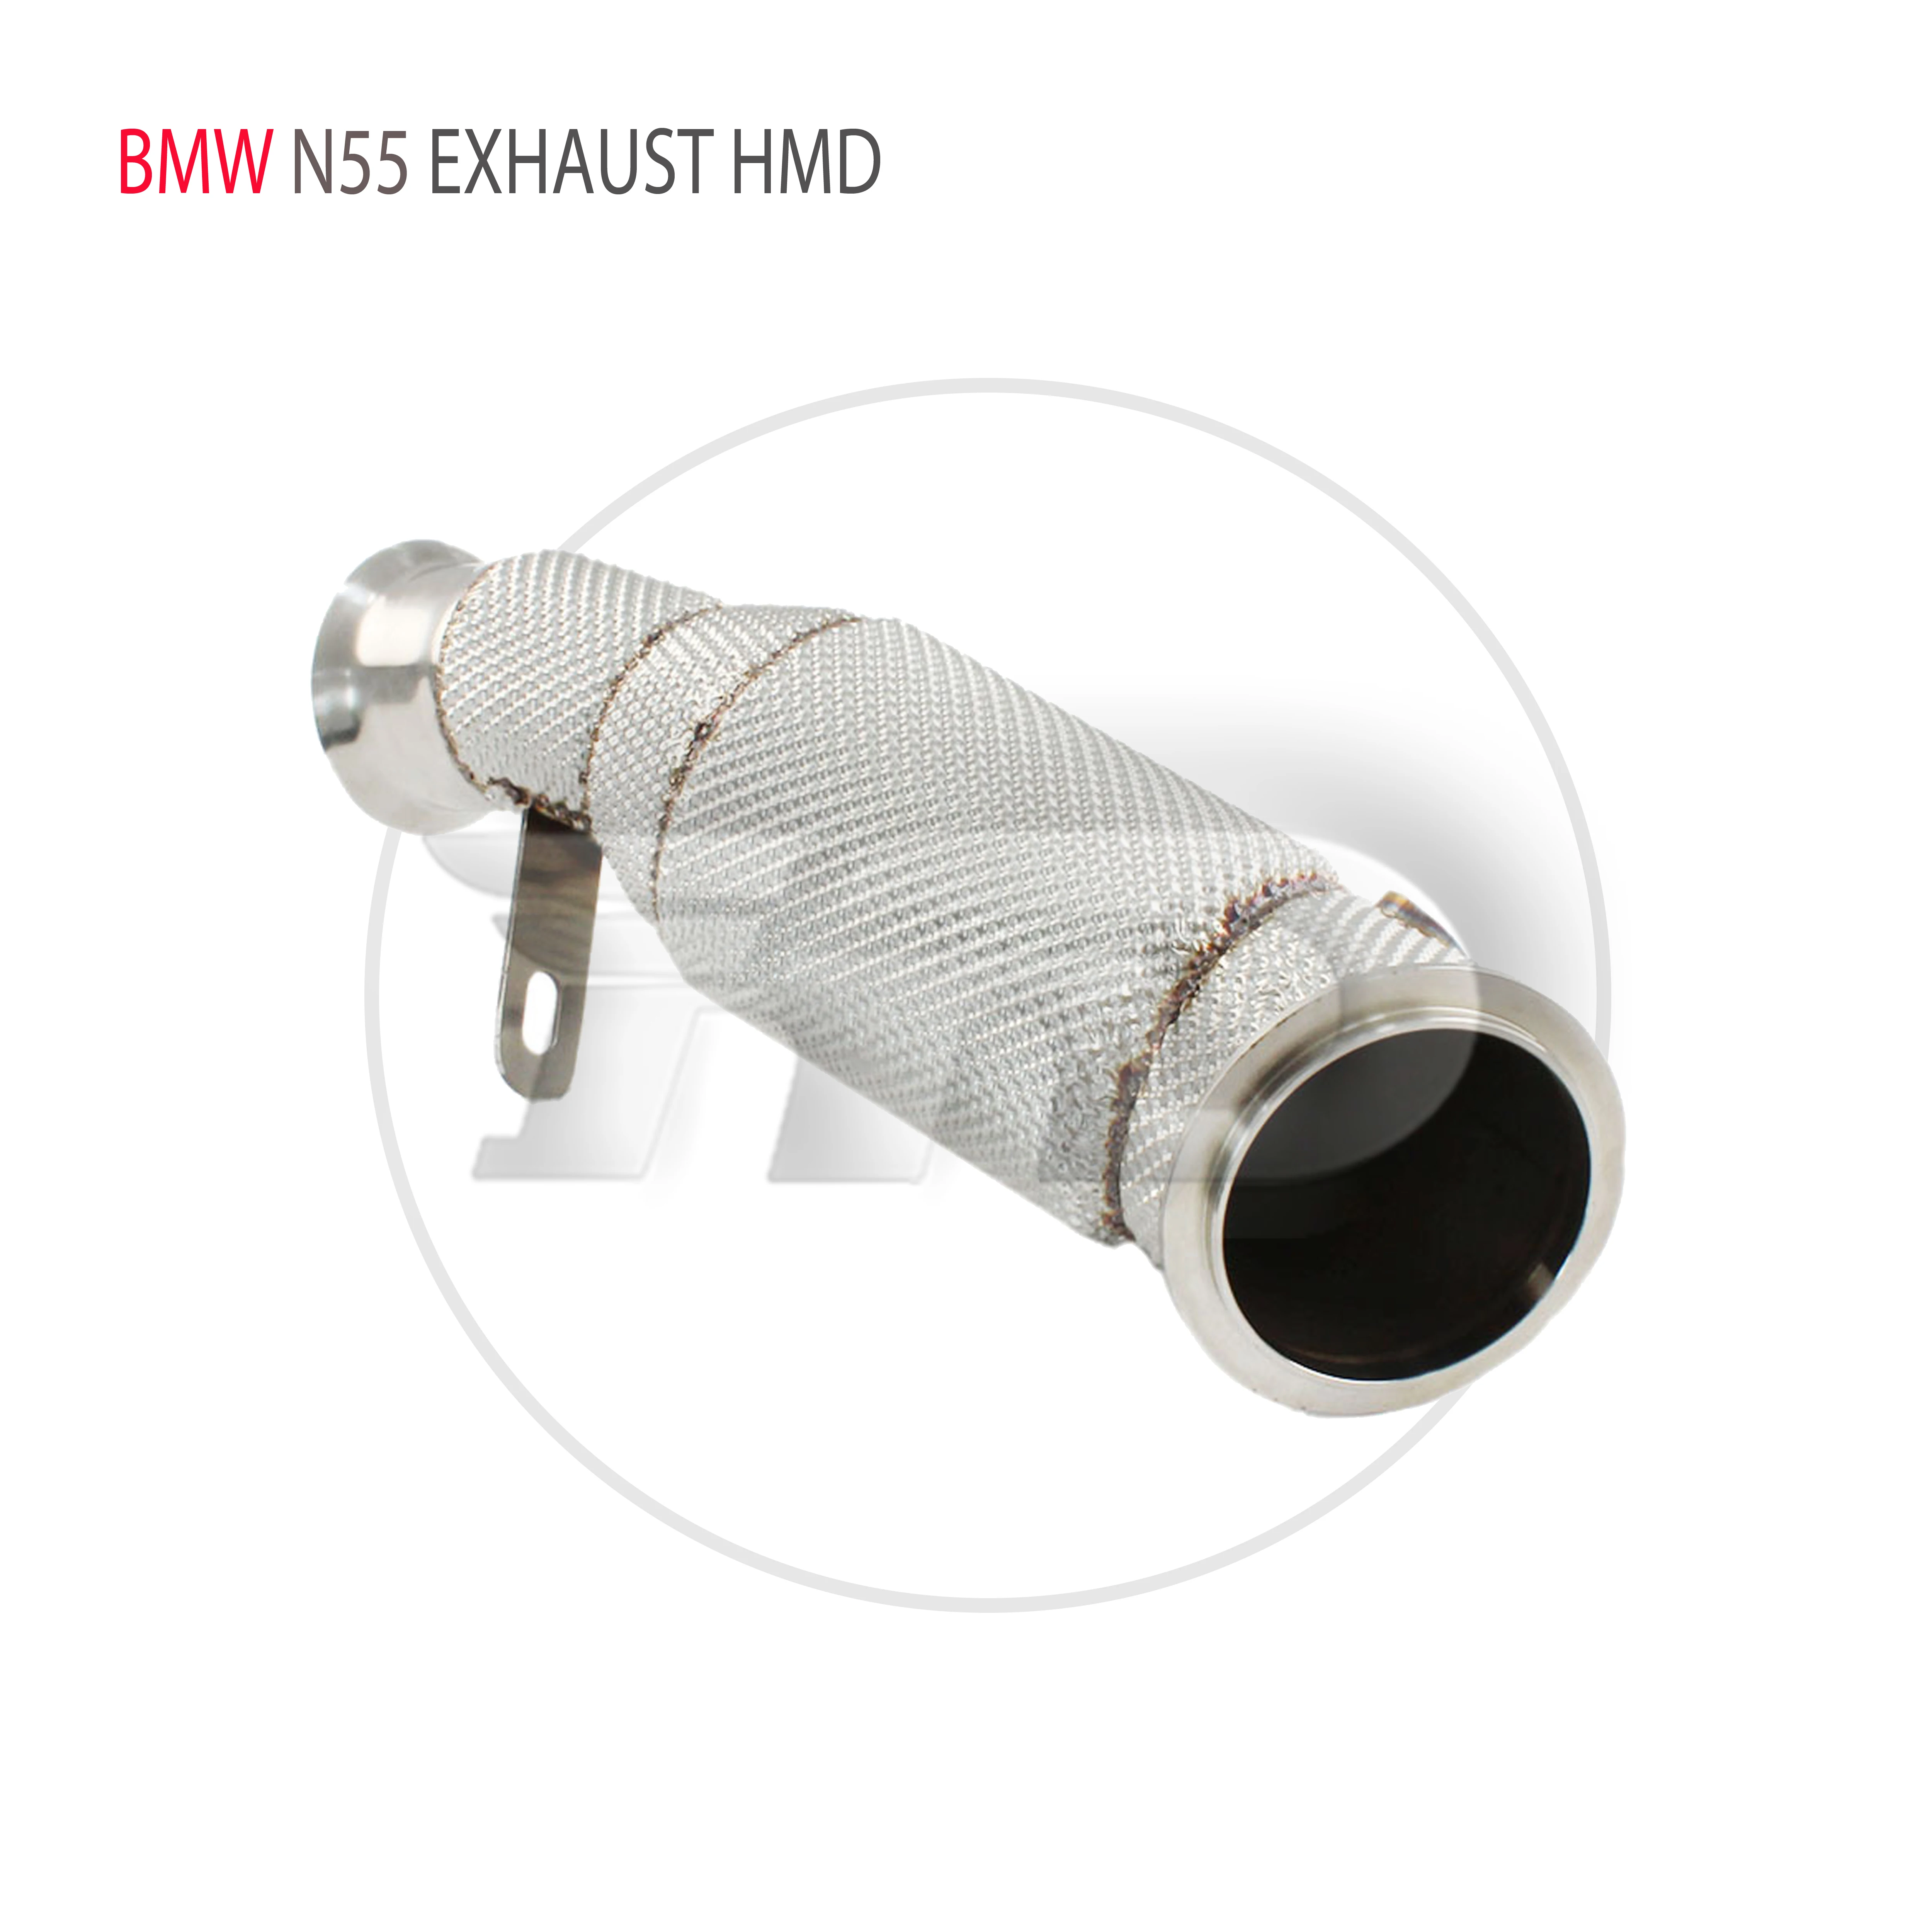 

HMD Exhaust System High Flow Performance Downpipe for BMW 640i N55 Engine 3.0T Car Accessories With Catalytic Converter Header